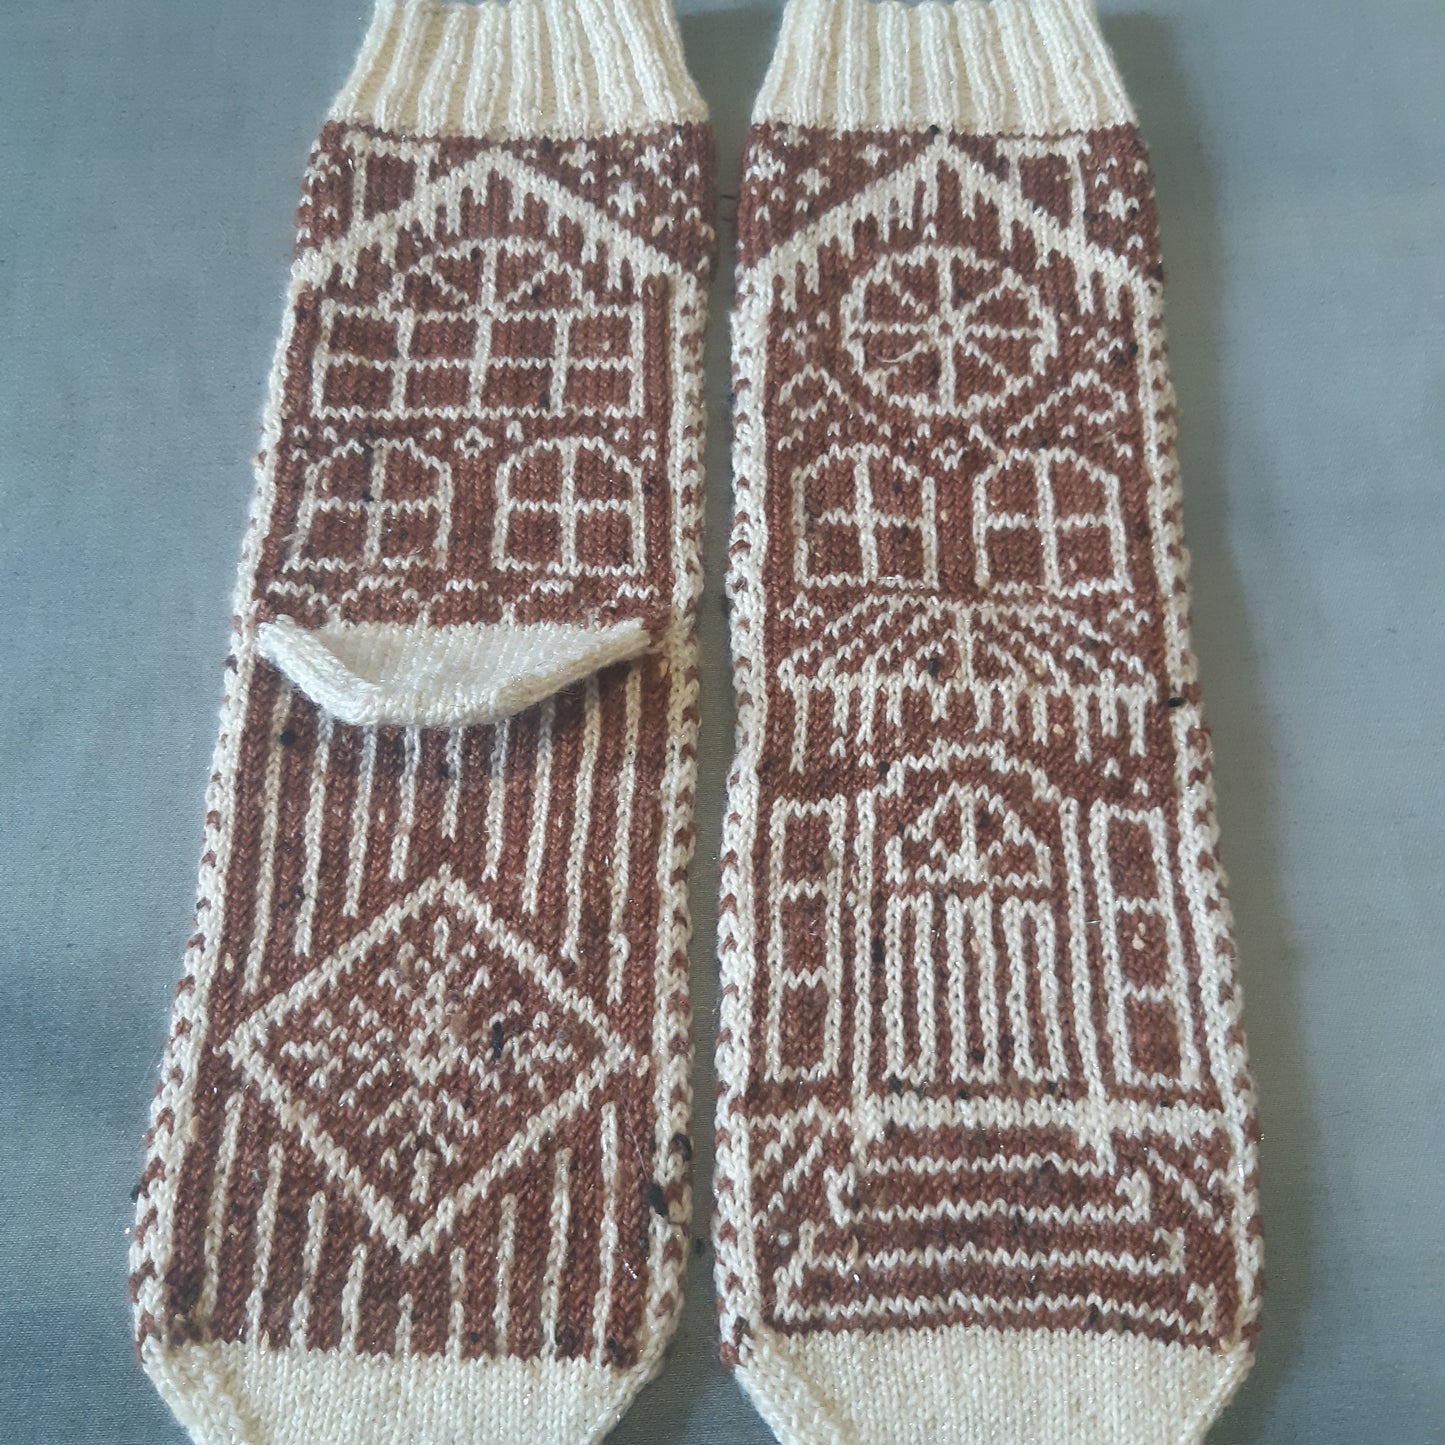 Gingerbread House Sock sets on Lush fingering 2 ply ...please choose set from menu